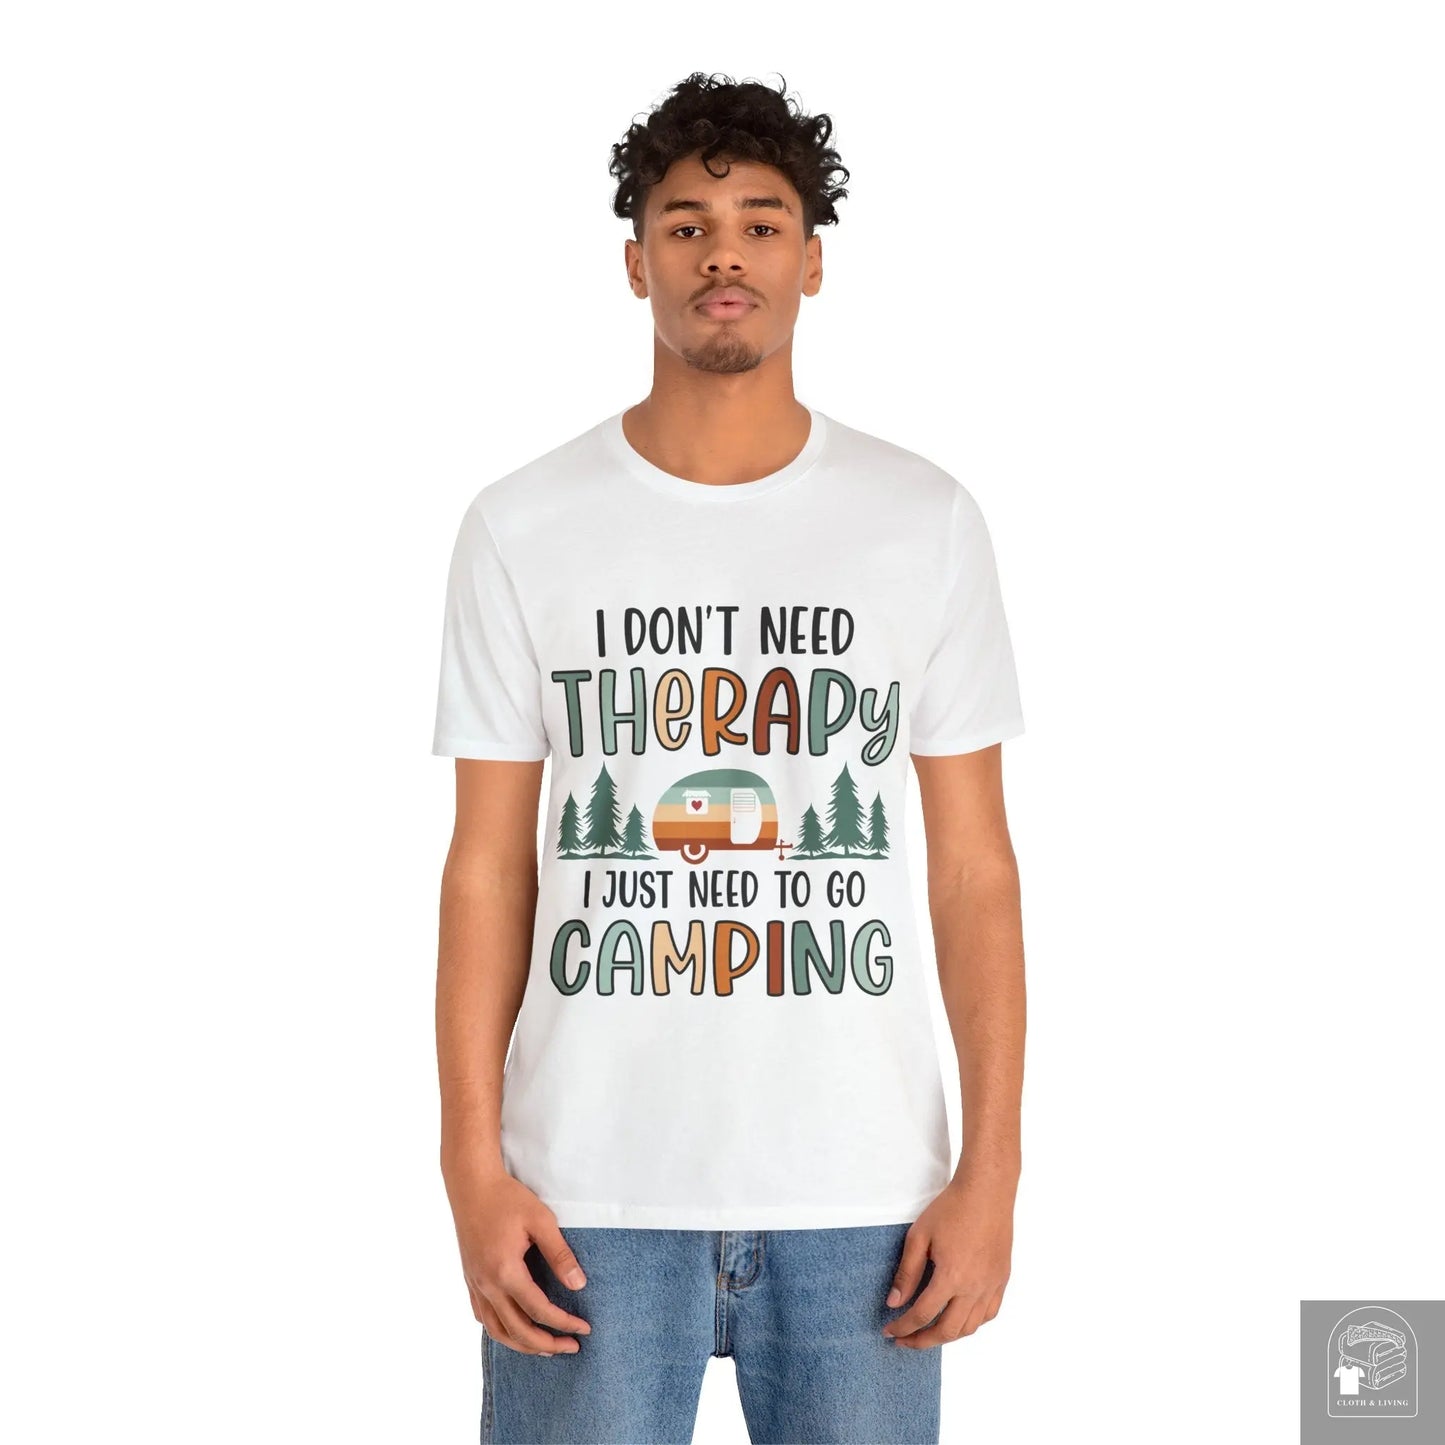 "I Just Need to go Camping" Unisex Jersey Short Sleeve Tee - Cloth & Living